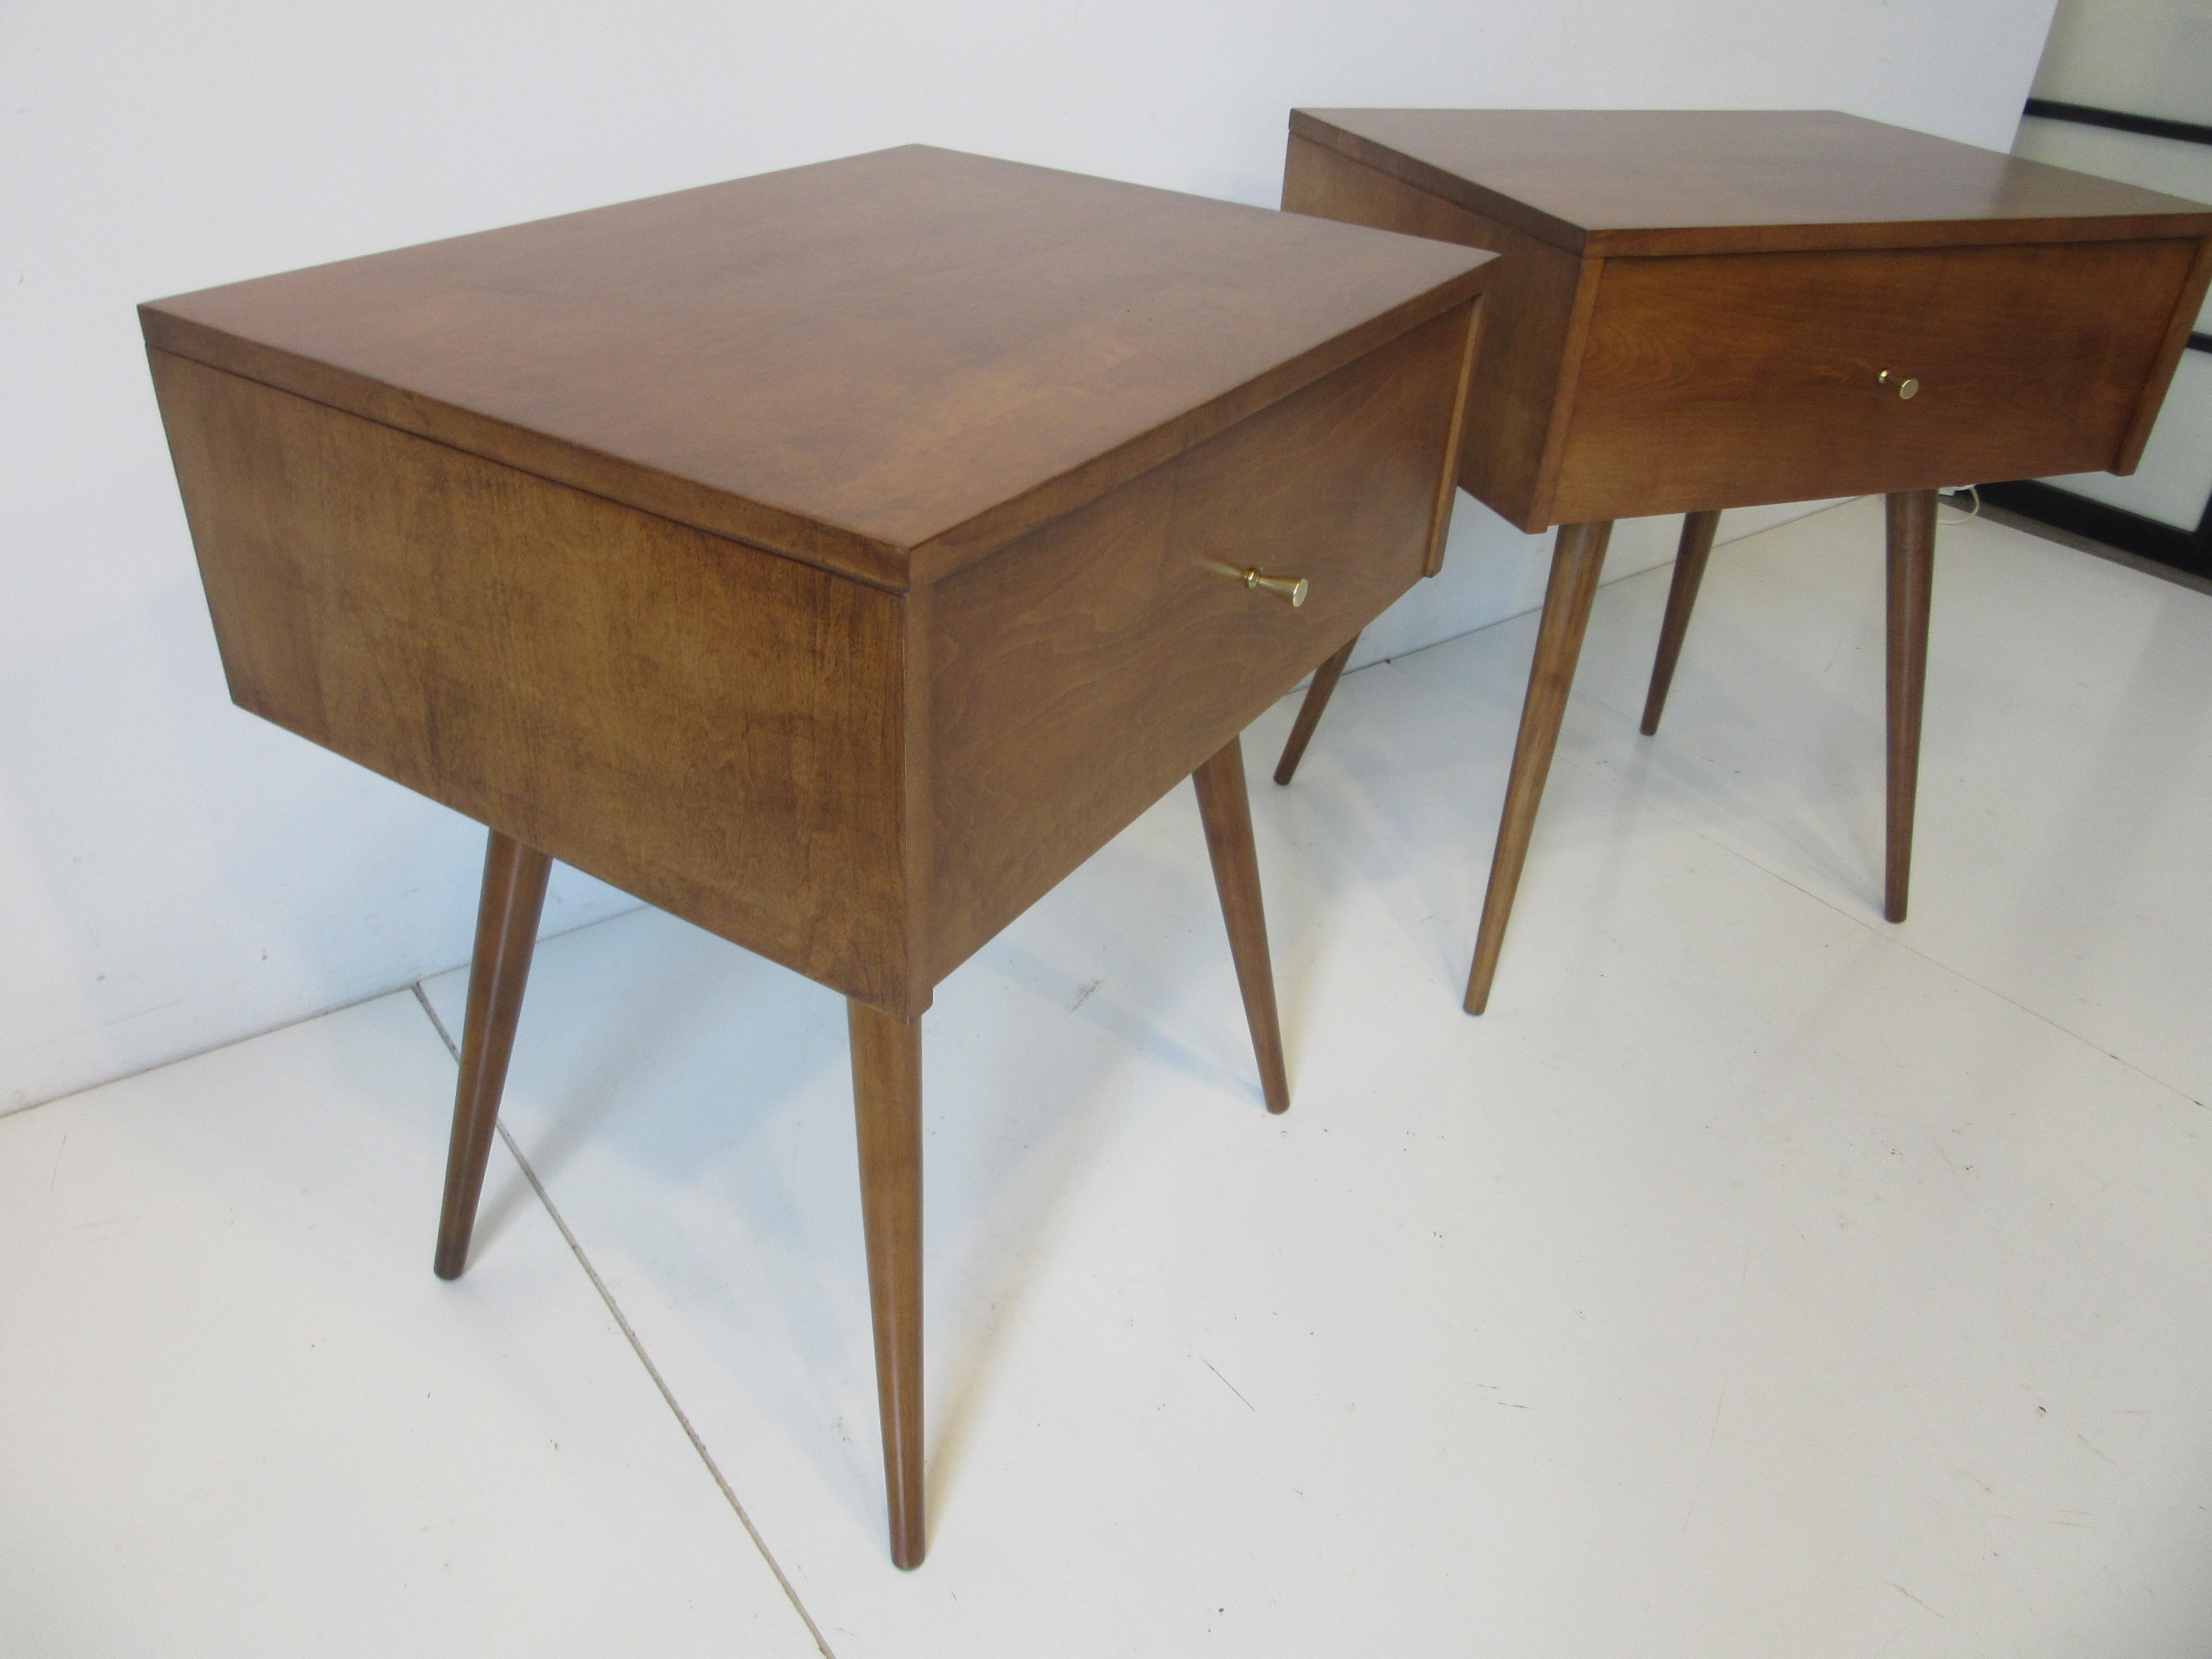 A pair of mid century medium walnut toned nightstands sized for today's higher pillow top matrasses with conical legs, each having one drawer with solid brass golf tee styled pulls . A great simple light look and feel crafted in solid wood typical